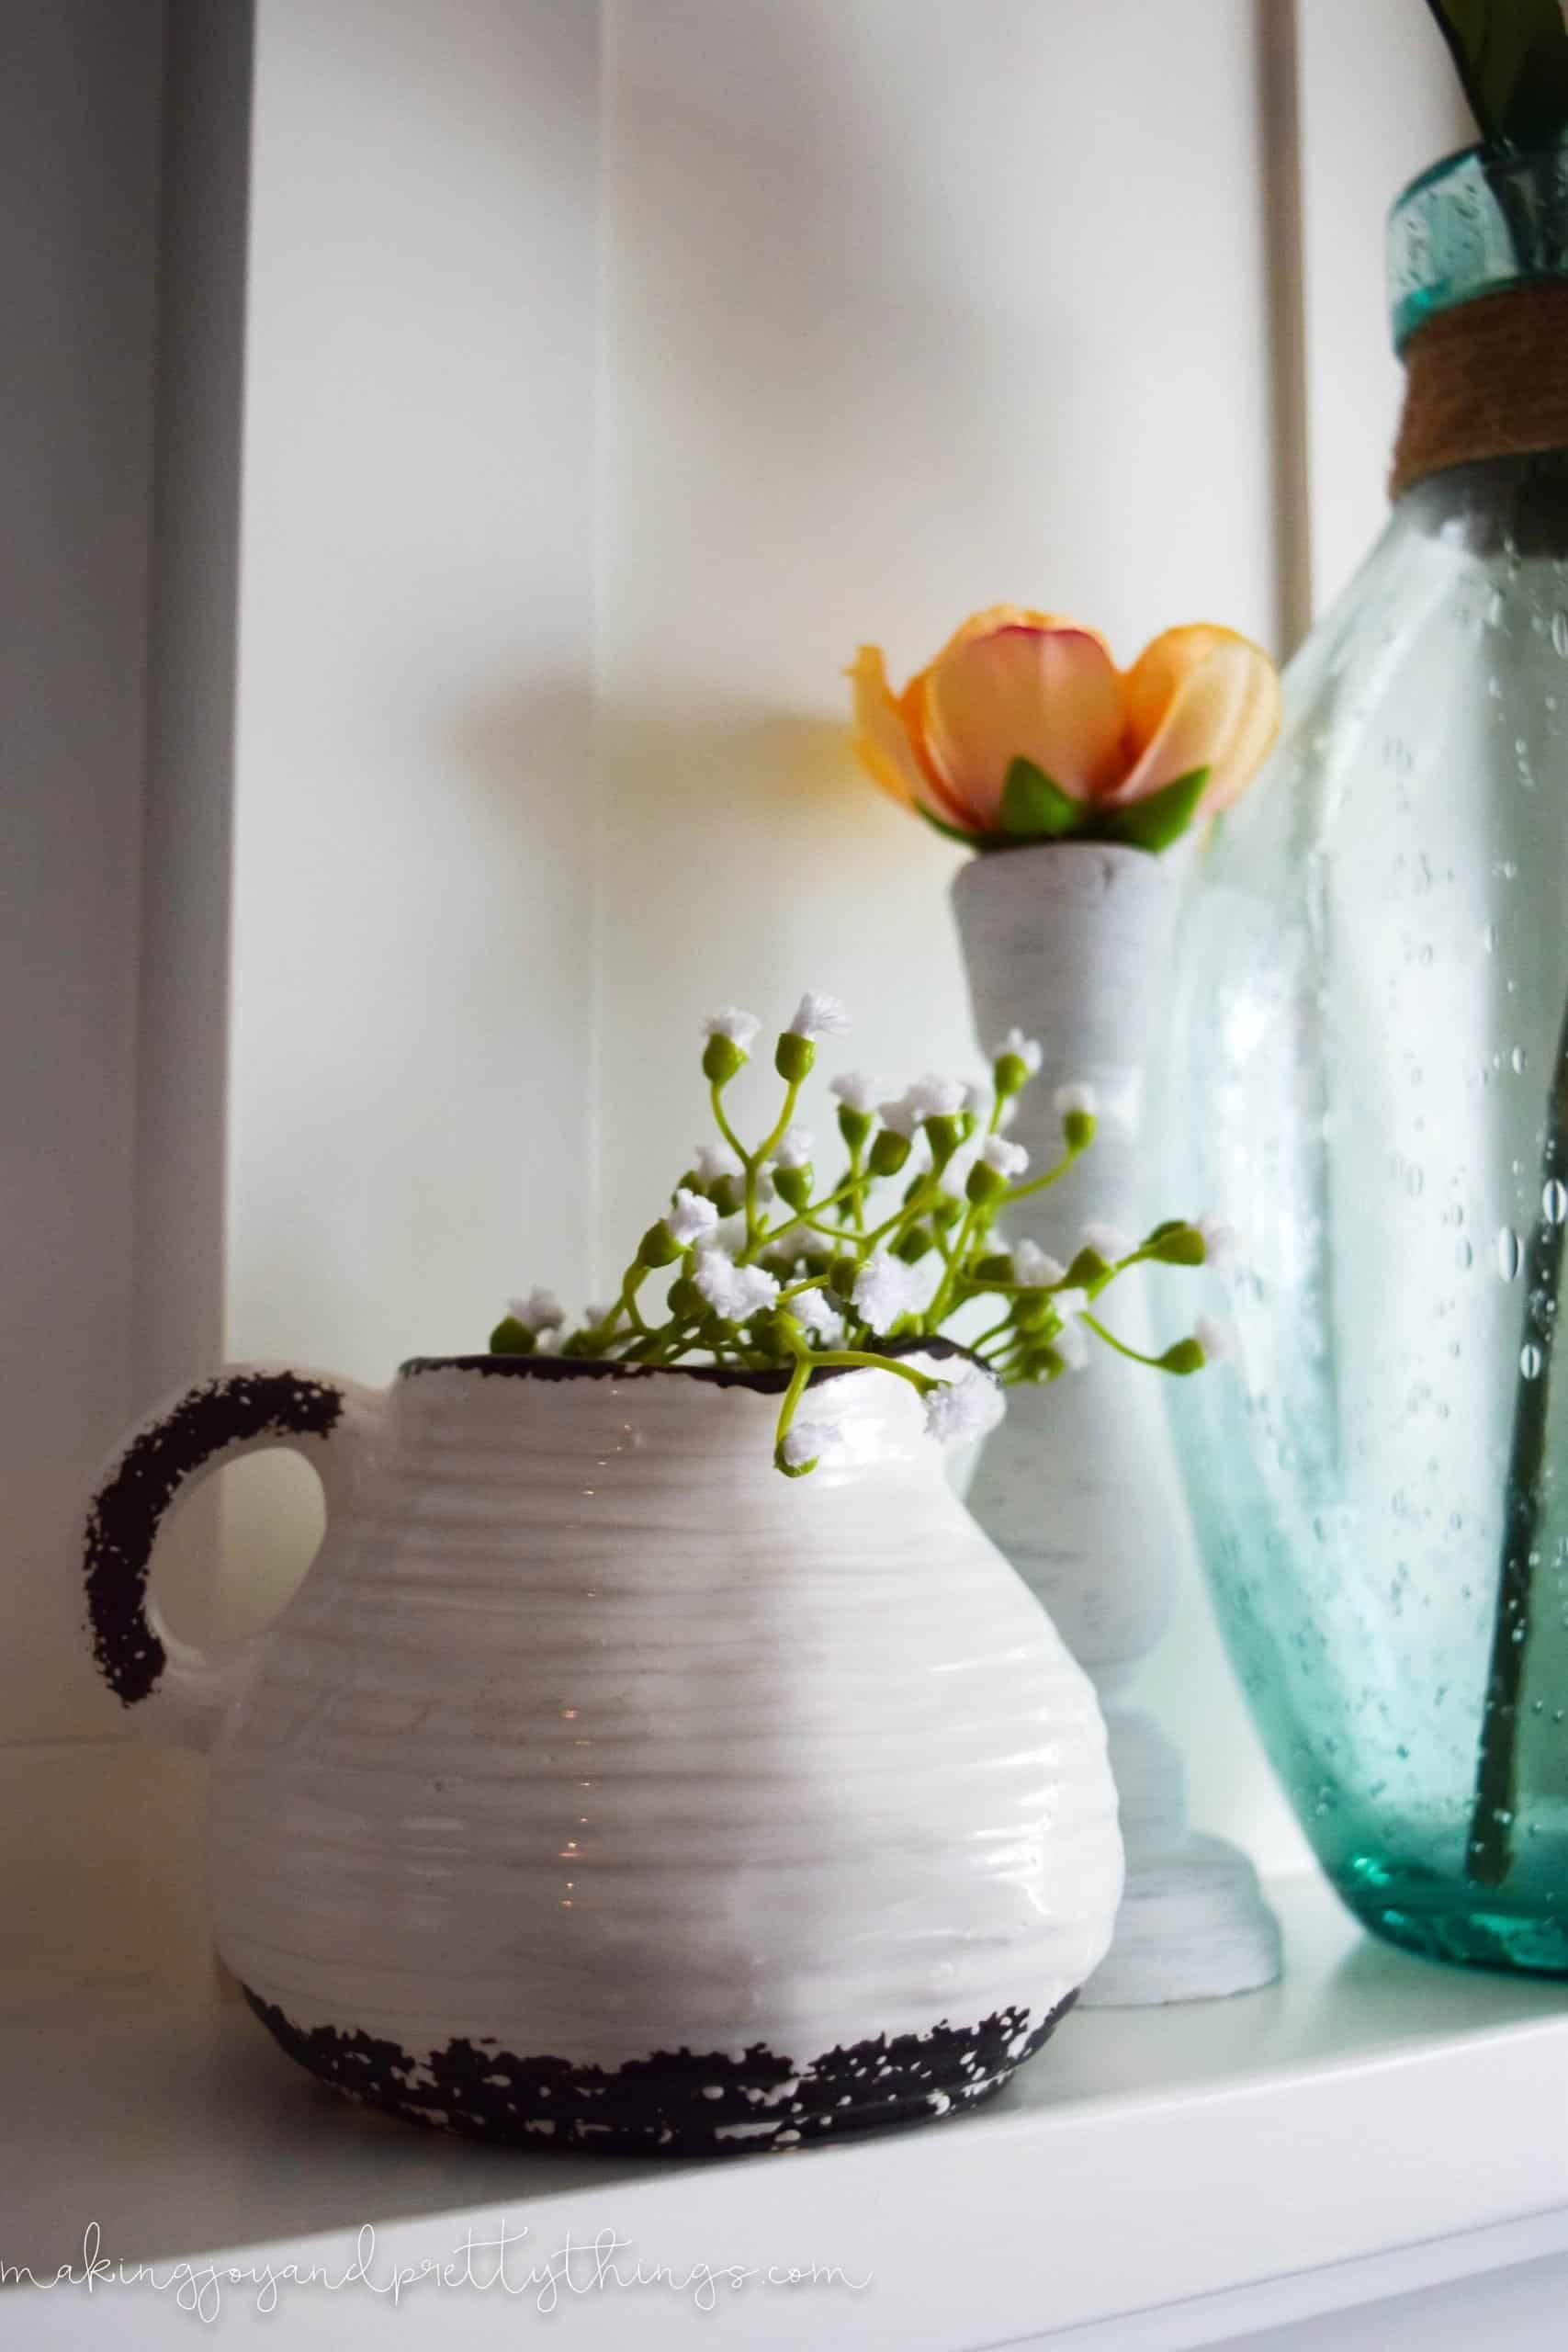 A close up look at one of the ceramic pottery vases, painted white and black, and filled with faux sprigs of greenery.